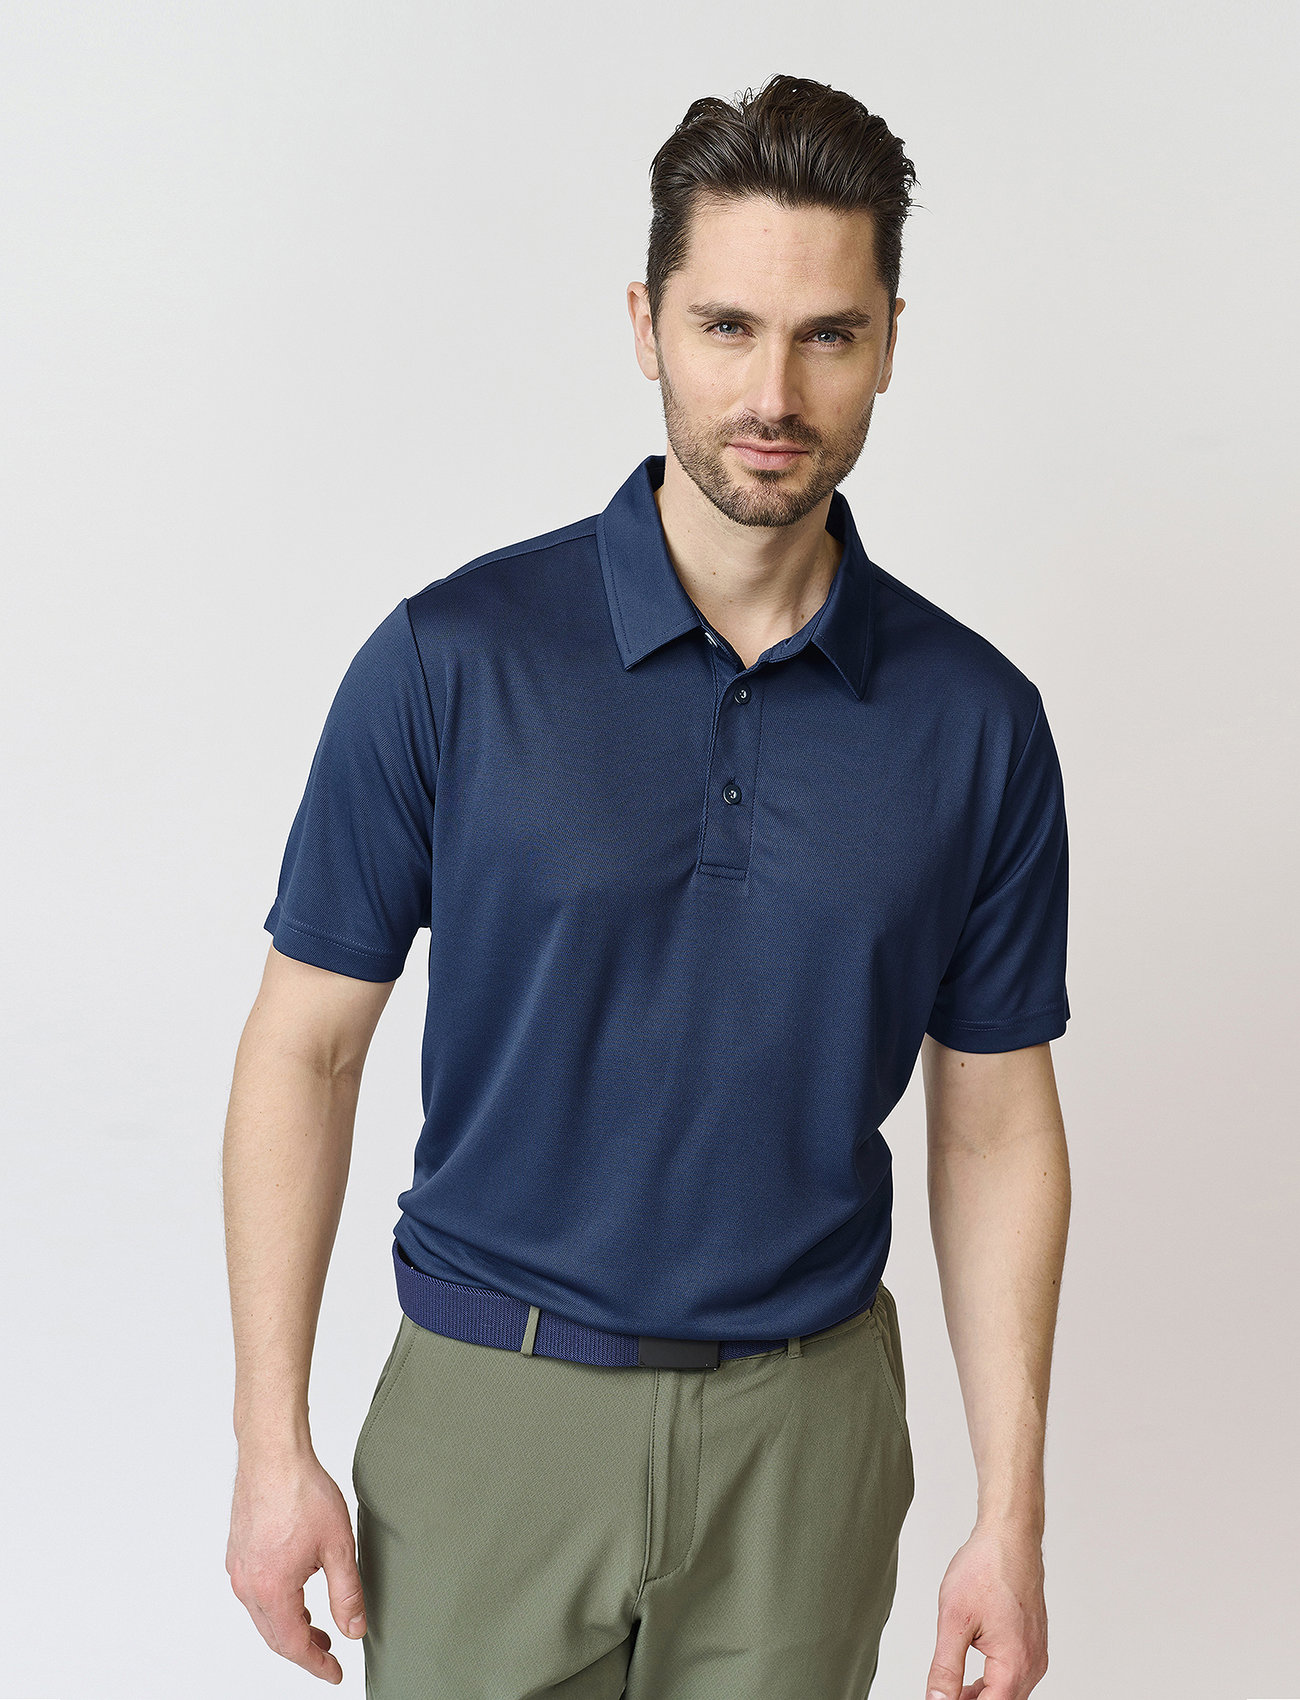 BACKTEE - Mens Performance Polo - short-sleeved polos - navy - 1